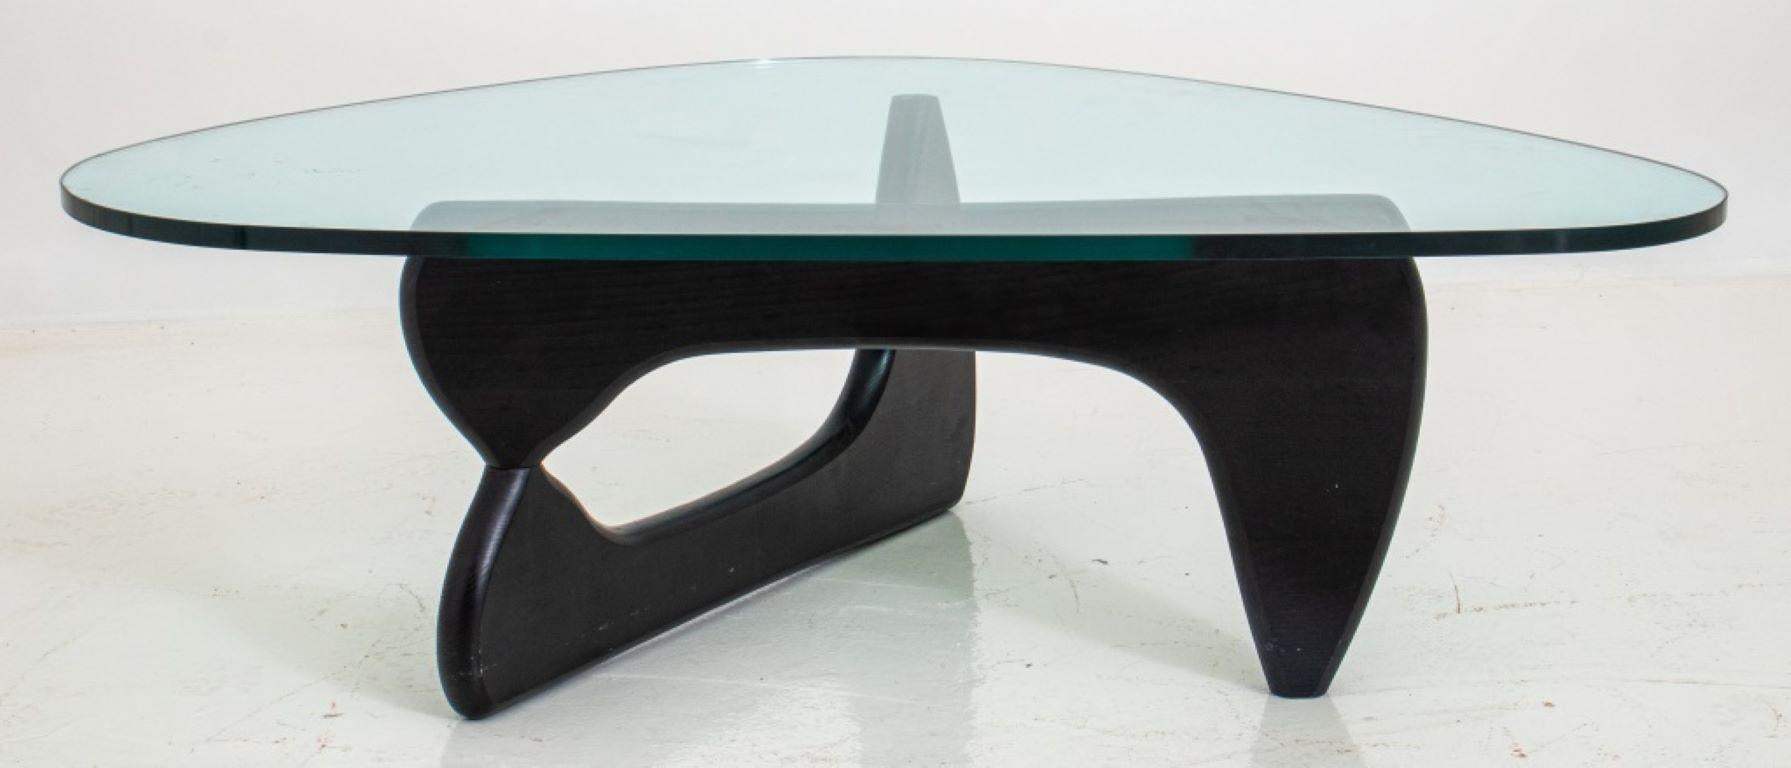 Midcentury modern amorphic table by Isamu Noguchi, (American, 1904 - 1988) the ebonized base comprising opposing hinged sections beneath a rounded elliptical triangular top.  

Dealer: S138XX